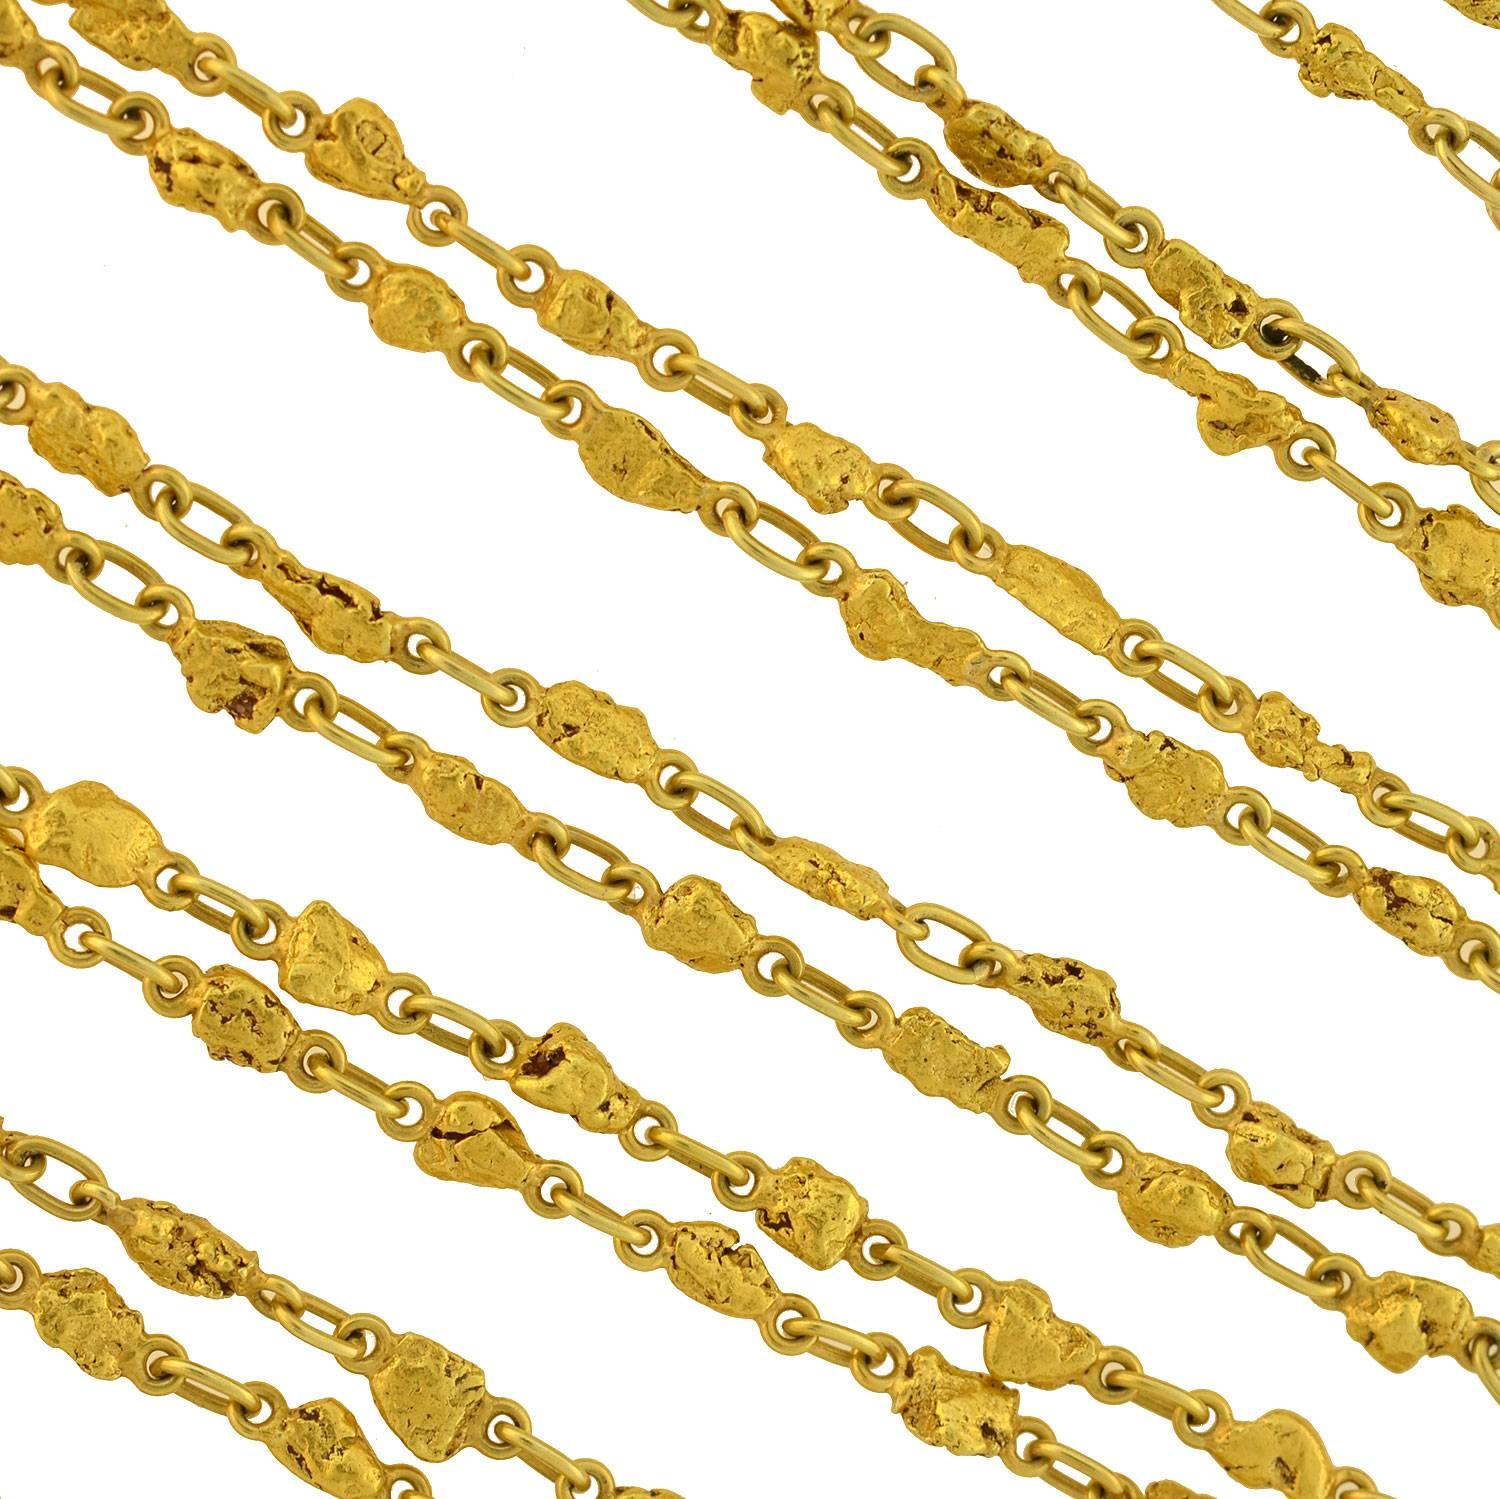 An incredible and unusual Victorian (ca1880s) era long gold nugget chain necklace! Crafted of genuine 22kt yellow gold nuggets connected by elongated links, this would have most likely have been a collectable souvenir from the California or Alaska